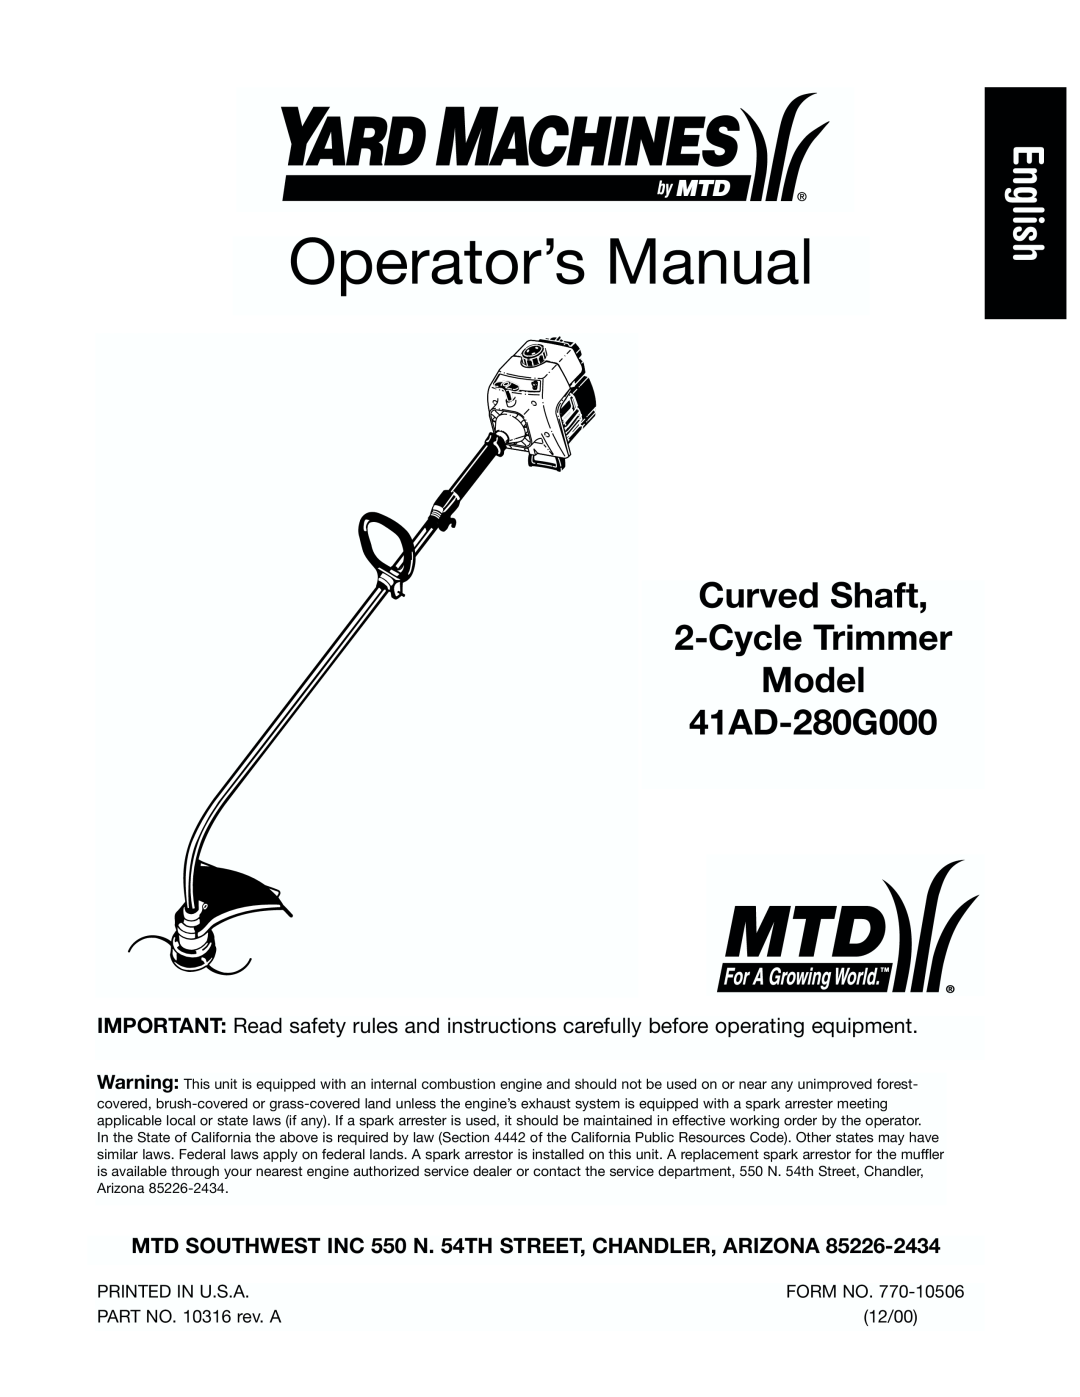 Yard Machines manual Curved Shaft 2-Cycle Trimmer Model 41AD-280G000, Operator’s Manual, English 